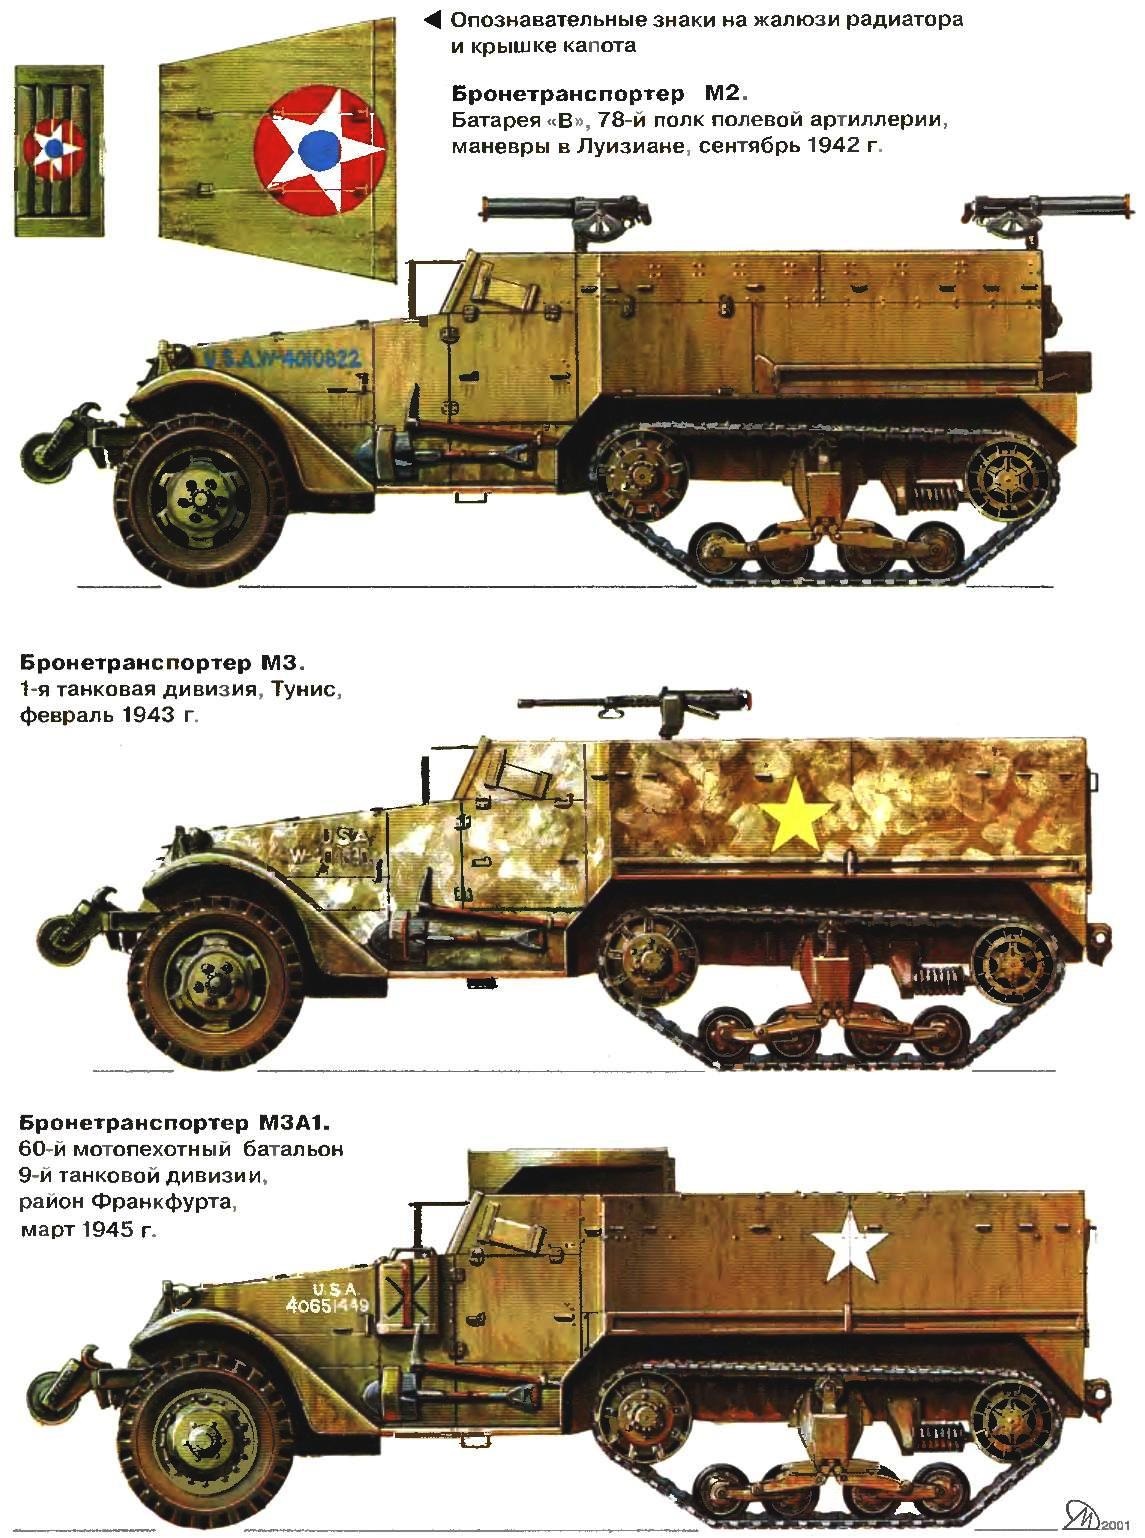 THE AMERICAN HALF-TRACK ARMORED VEHICLES